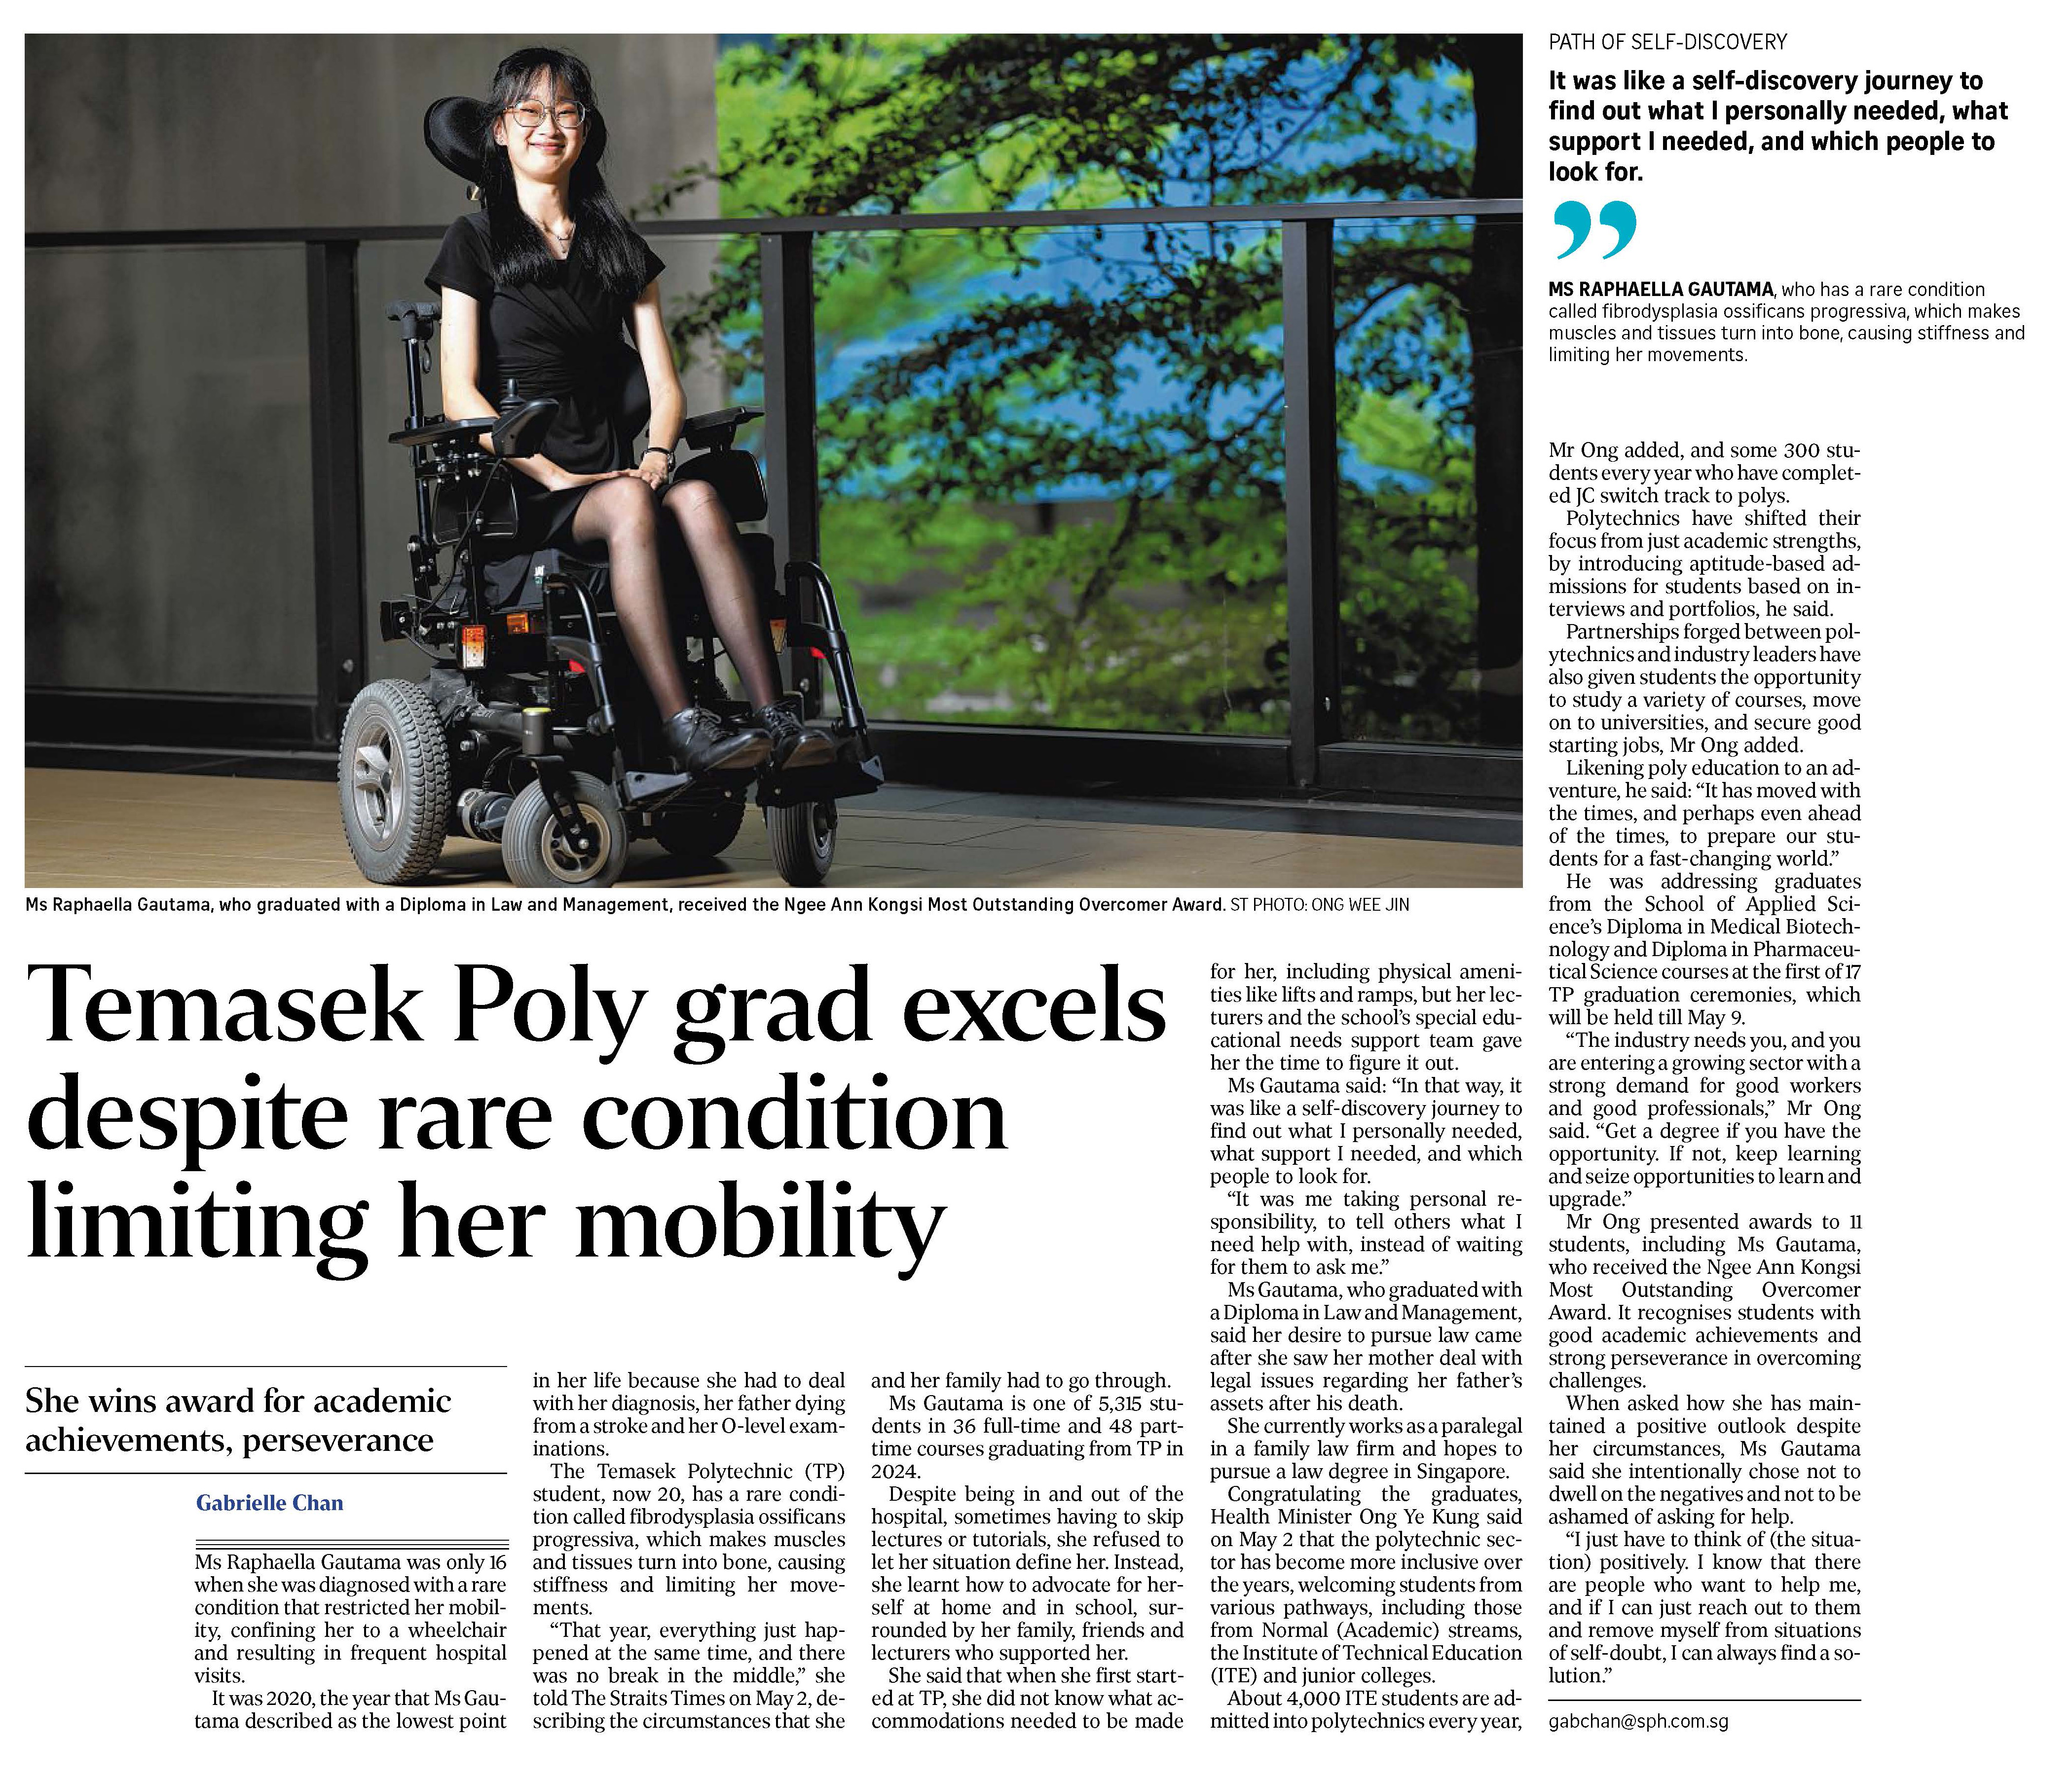 Temasek Poly grad excels despite rare condition limiting her mobility 